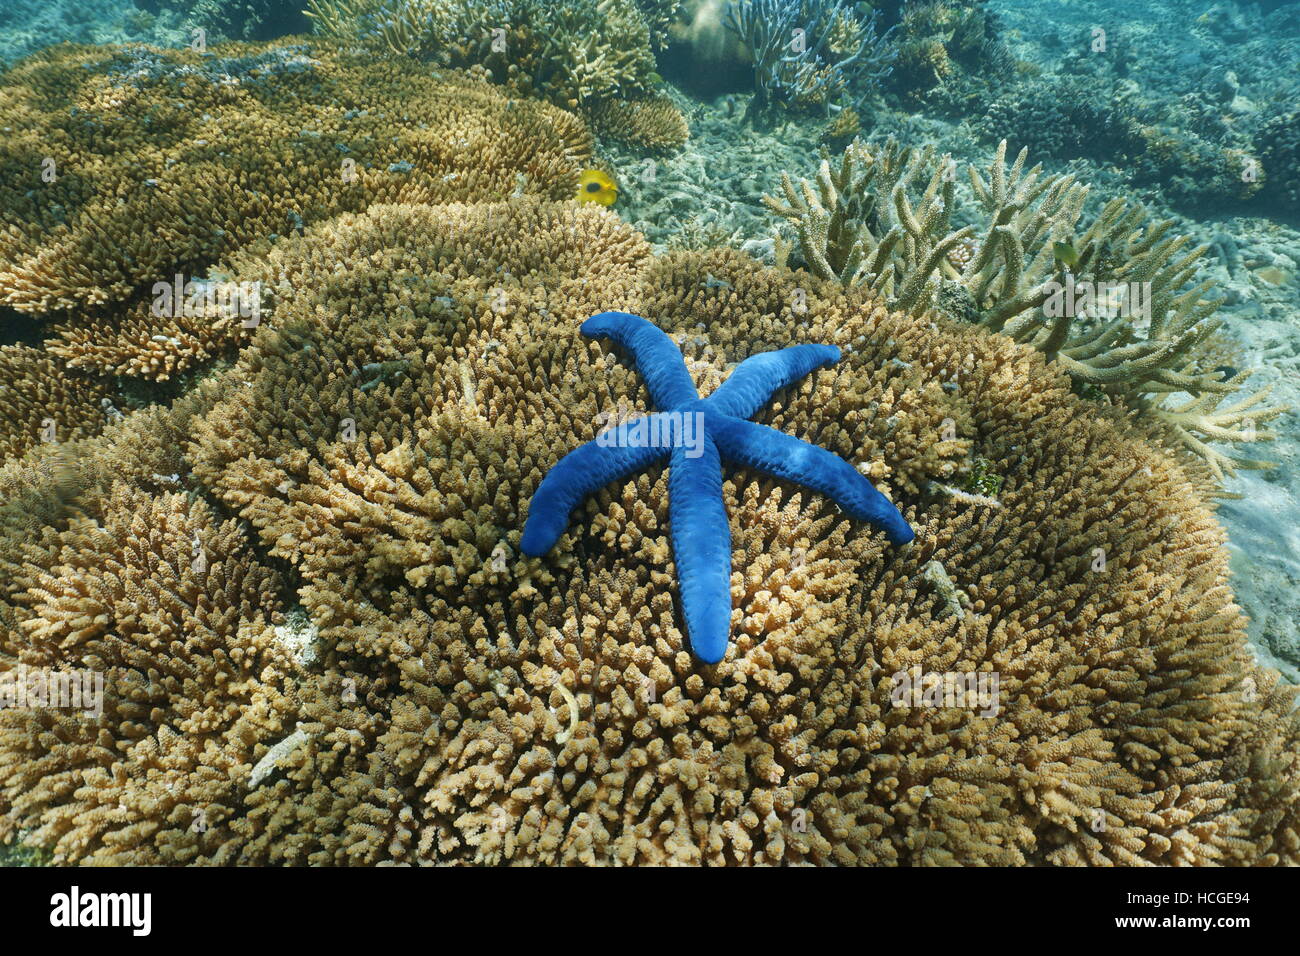 Linckia laevigata blue sea star underwater, over Acropora table coral, south Pacific ocean, New Caledonia Stock Photo